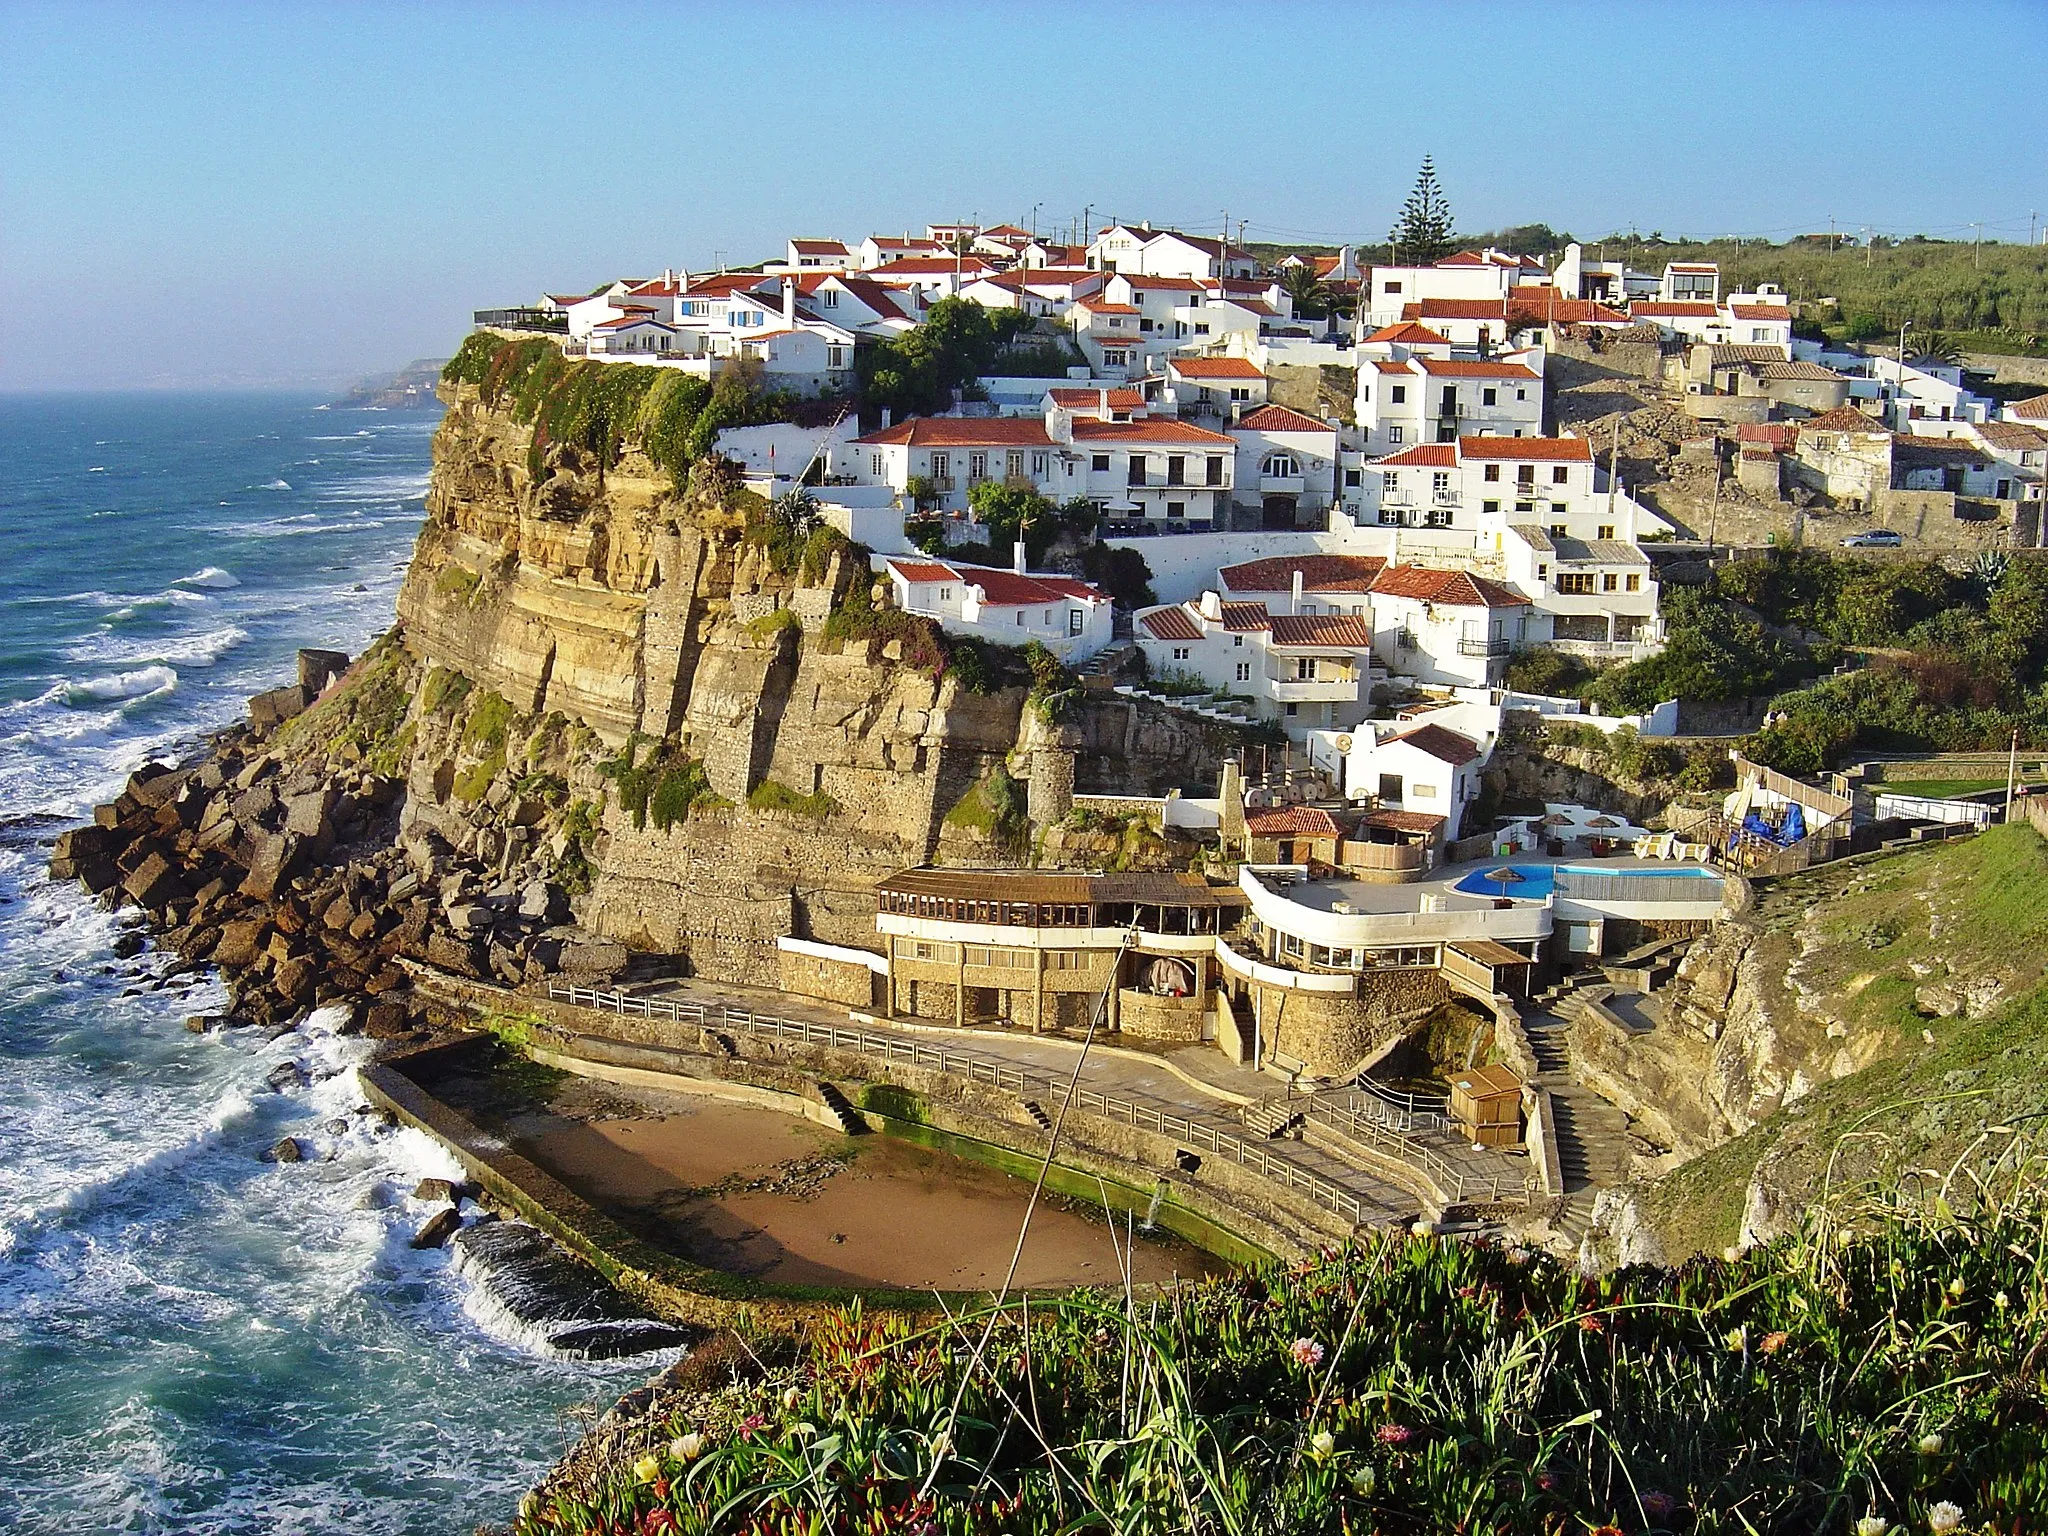 Photo showing: Azenhas do Mar is a seaside town in the municipality of Sintra, Portugal. Picture taken by User:Husond in May 2007.